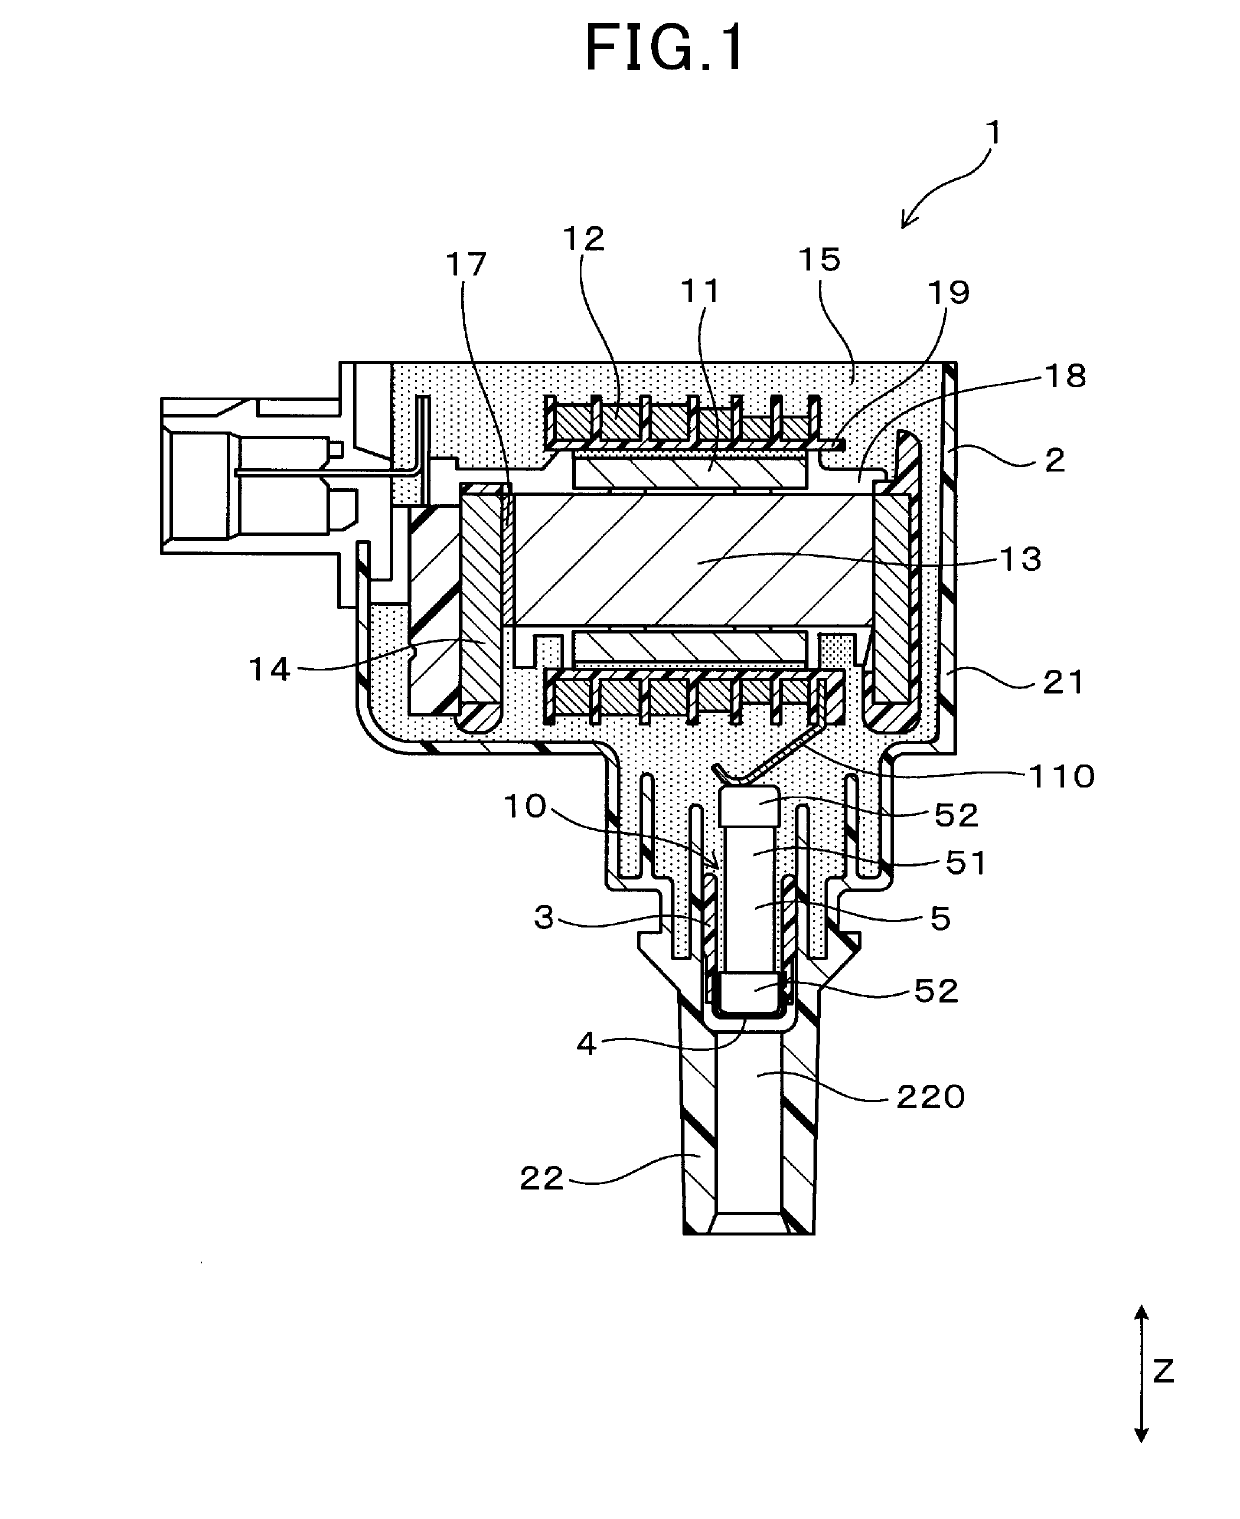 Ignition coil for internal combustion engine